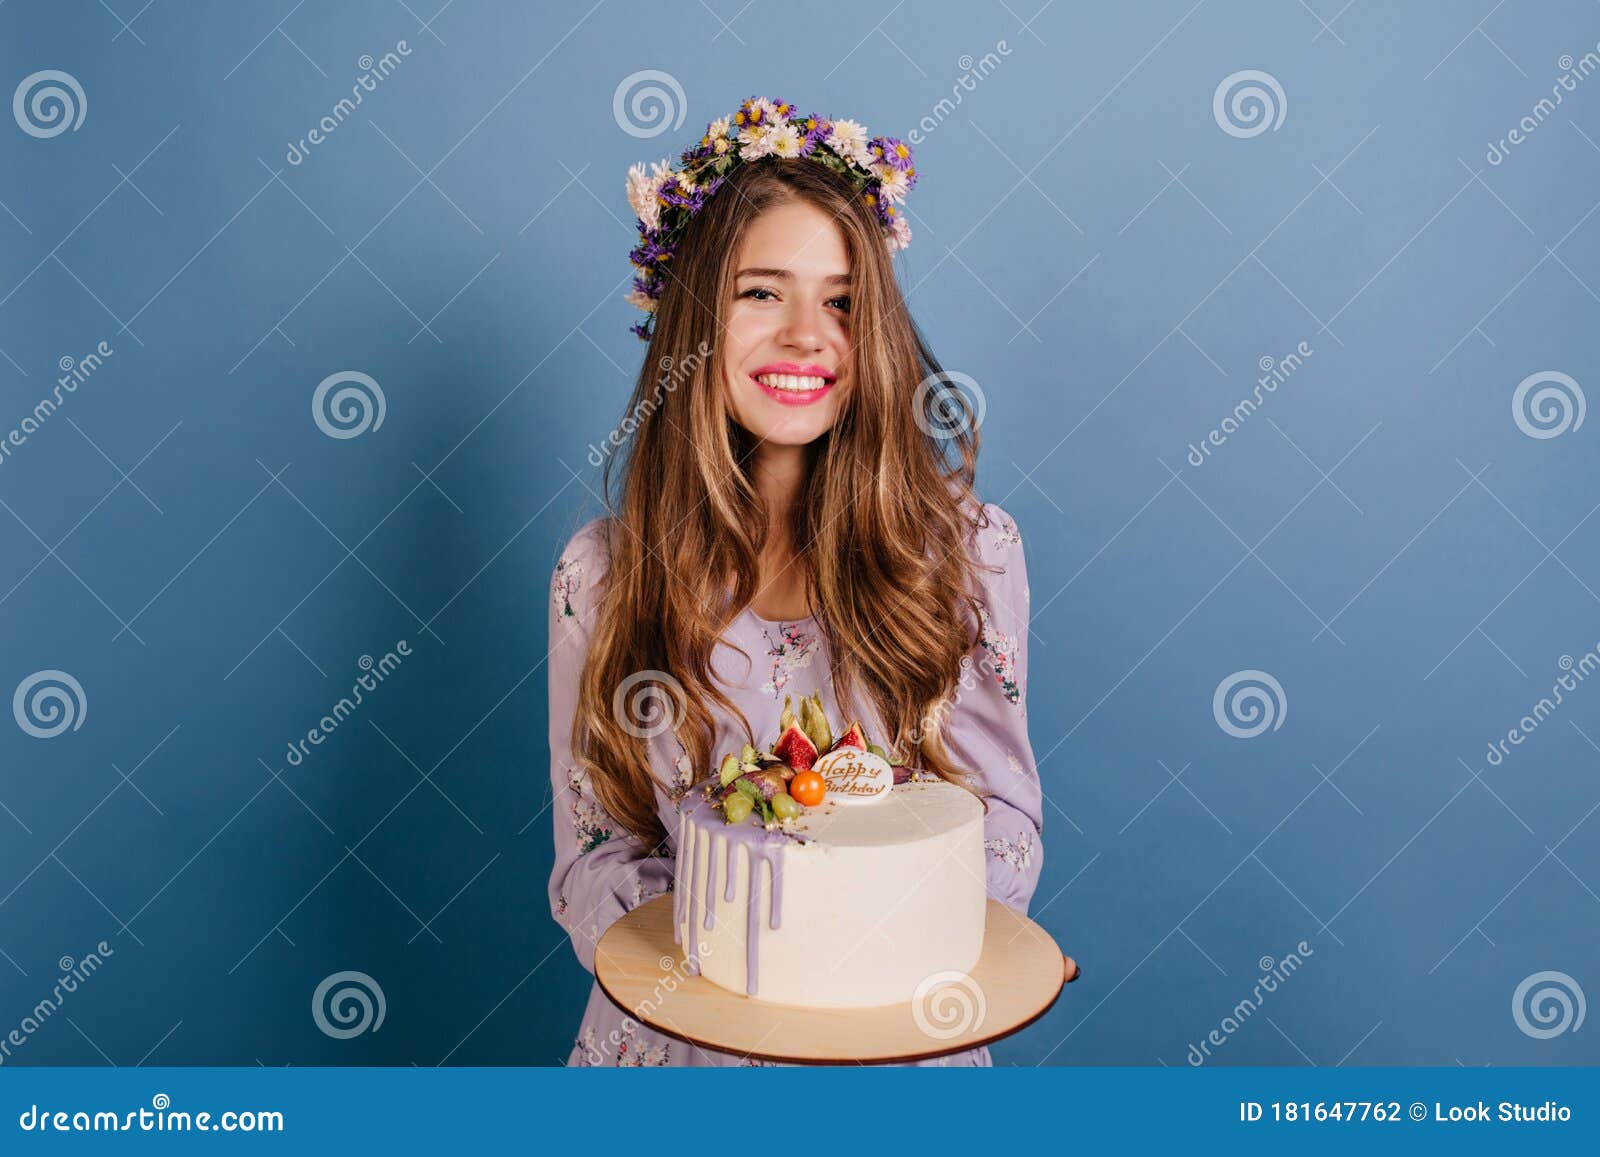 Free Photo | Funny white girl posing with tasty birthday cake. indoor shot  of excited female model holding chocolate pie with berries.